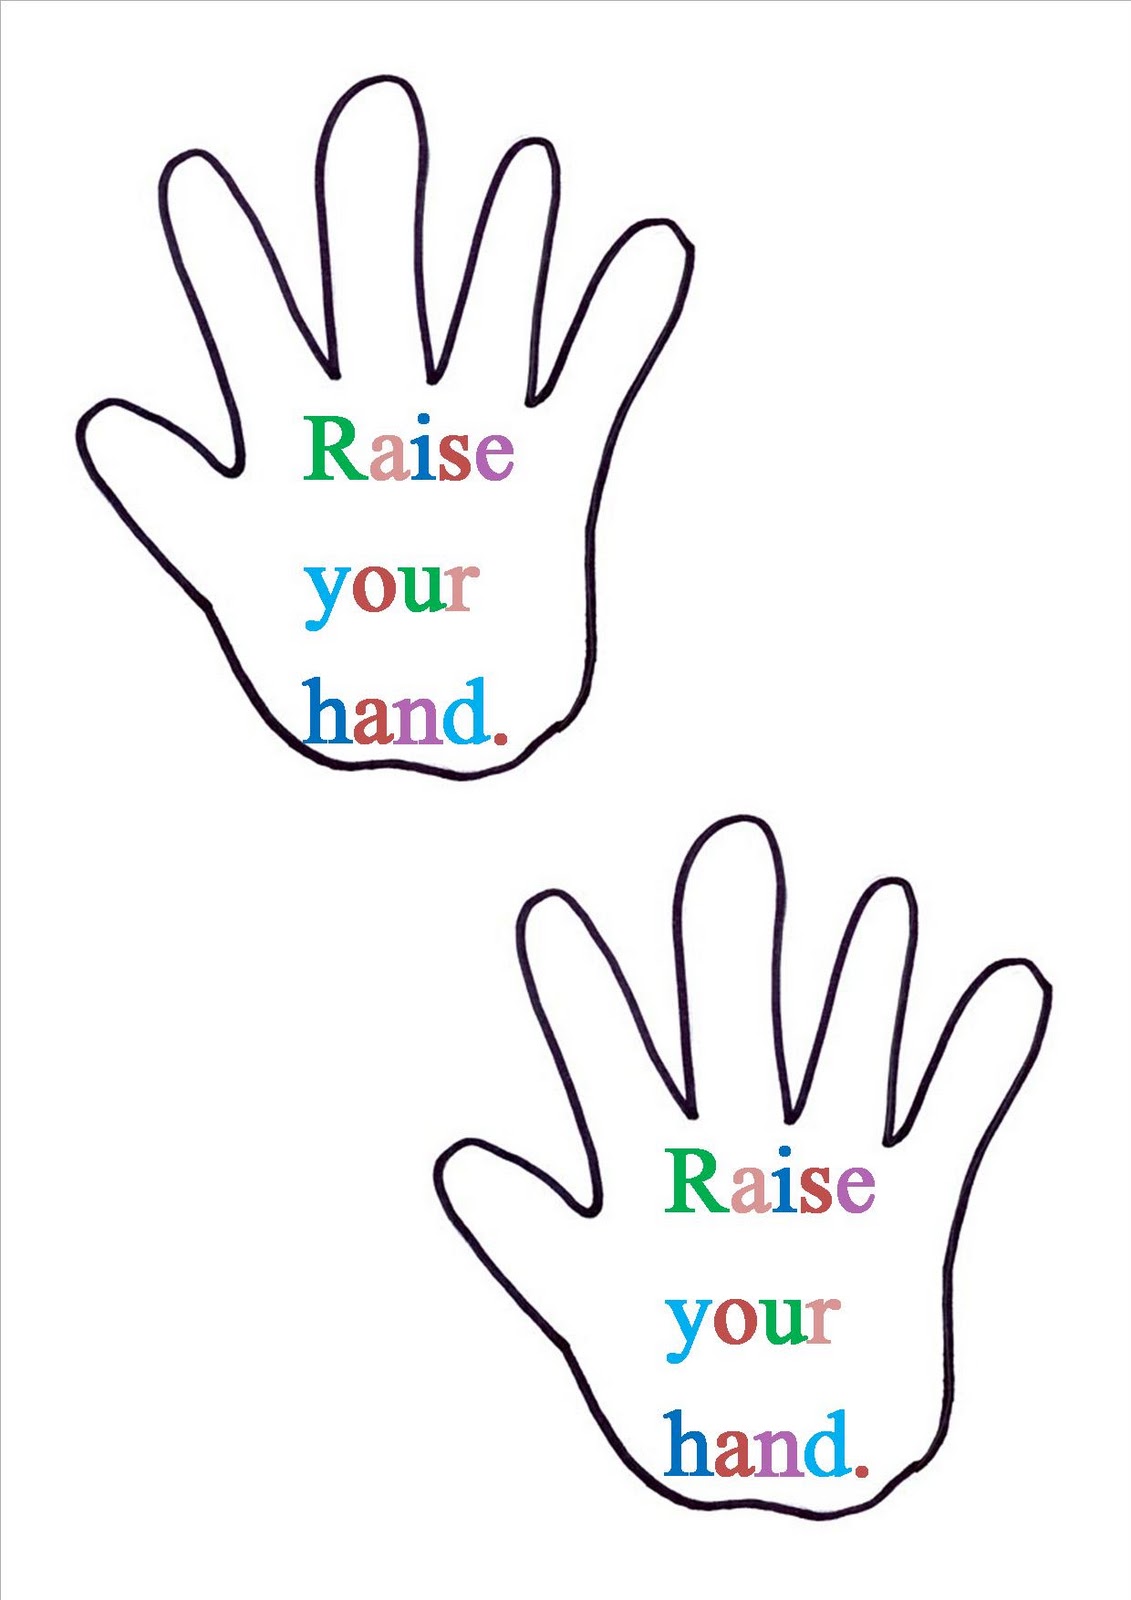 Check out the new FREE and PRINTABLE Handy Hands added to the Downloadable, Printable and Versatile Resources section on the right 